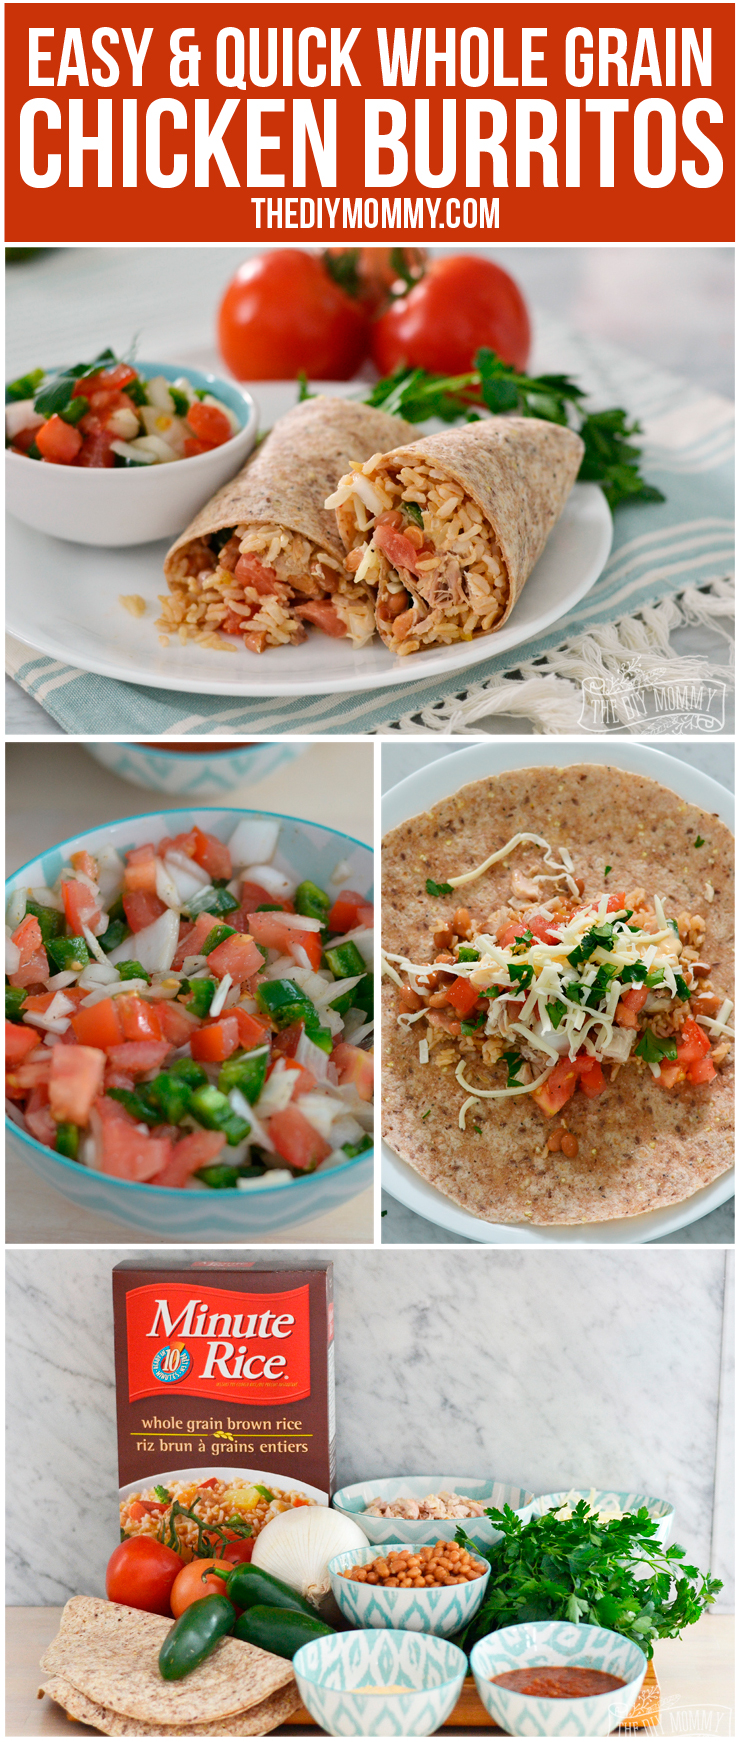 Healthy, Whole Grain Chicken Burritos- so fast, tasty and easy!